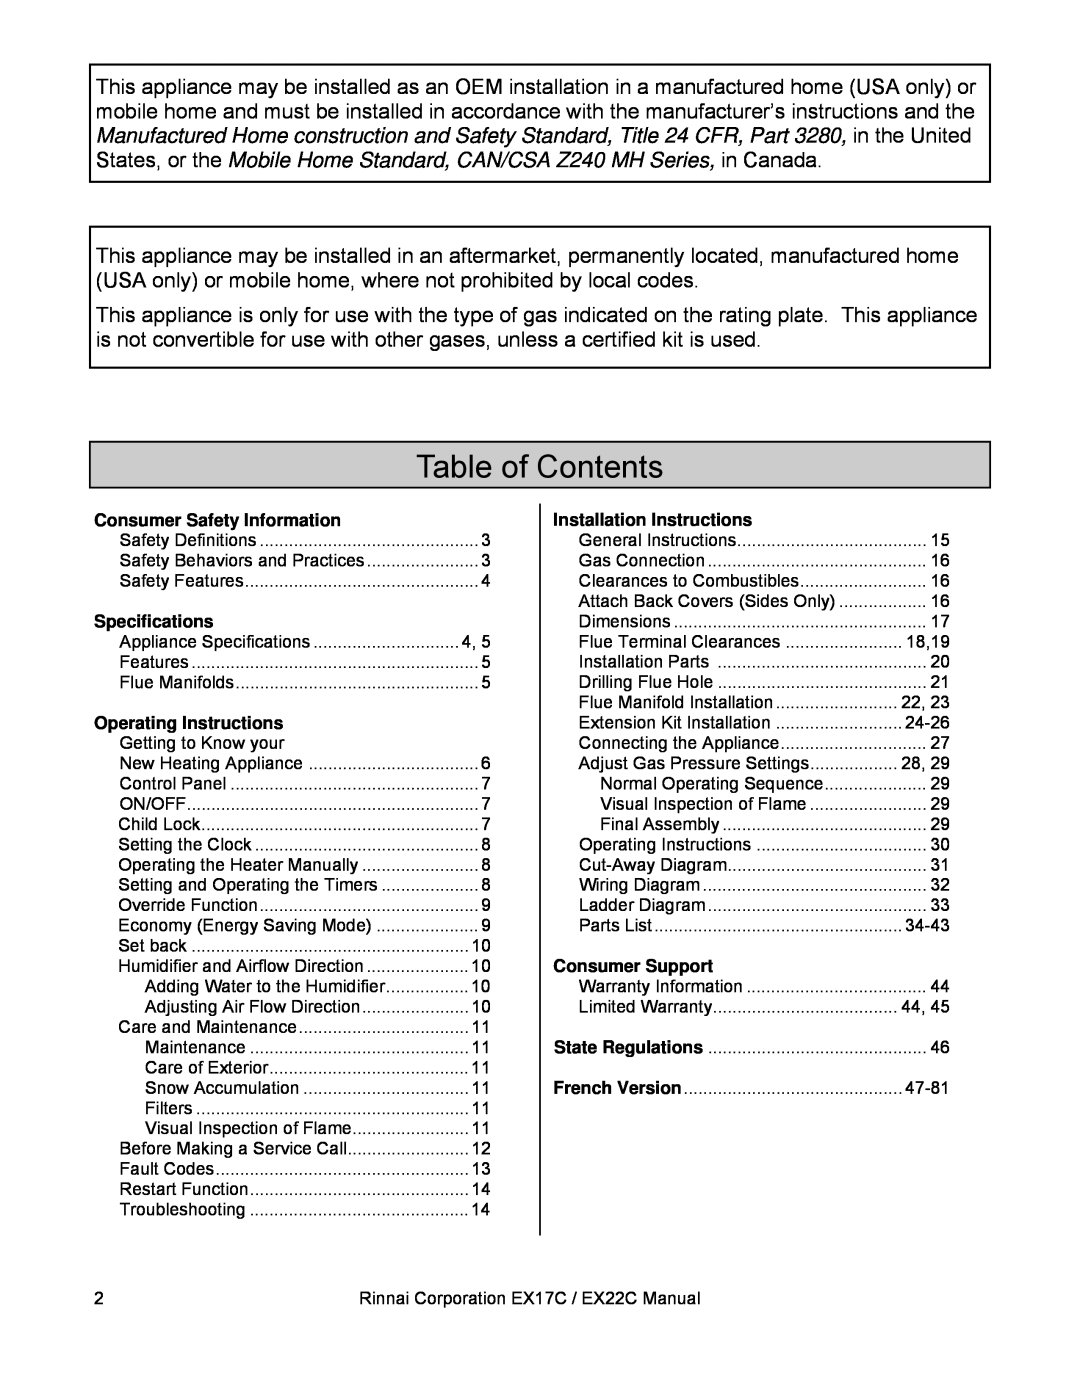 Rinnai EX22C (RHFE-559FTA) Table of Contents, Consumer Safety Information, Specifications, Operating Instructions 